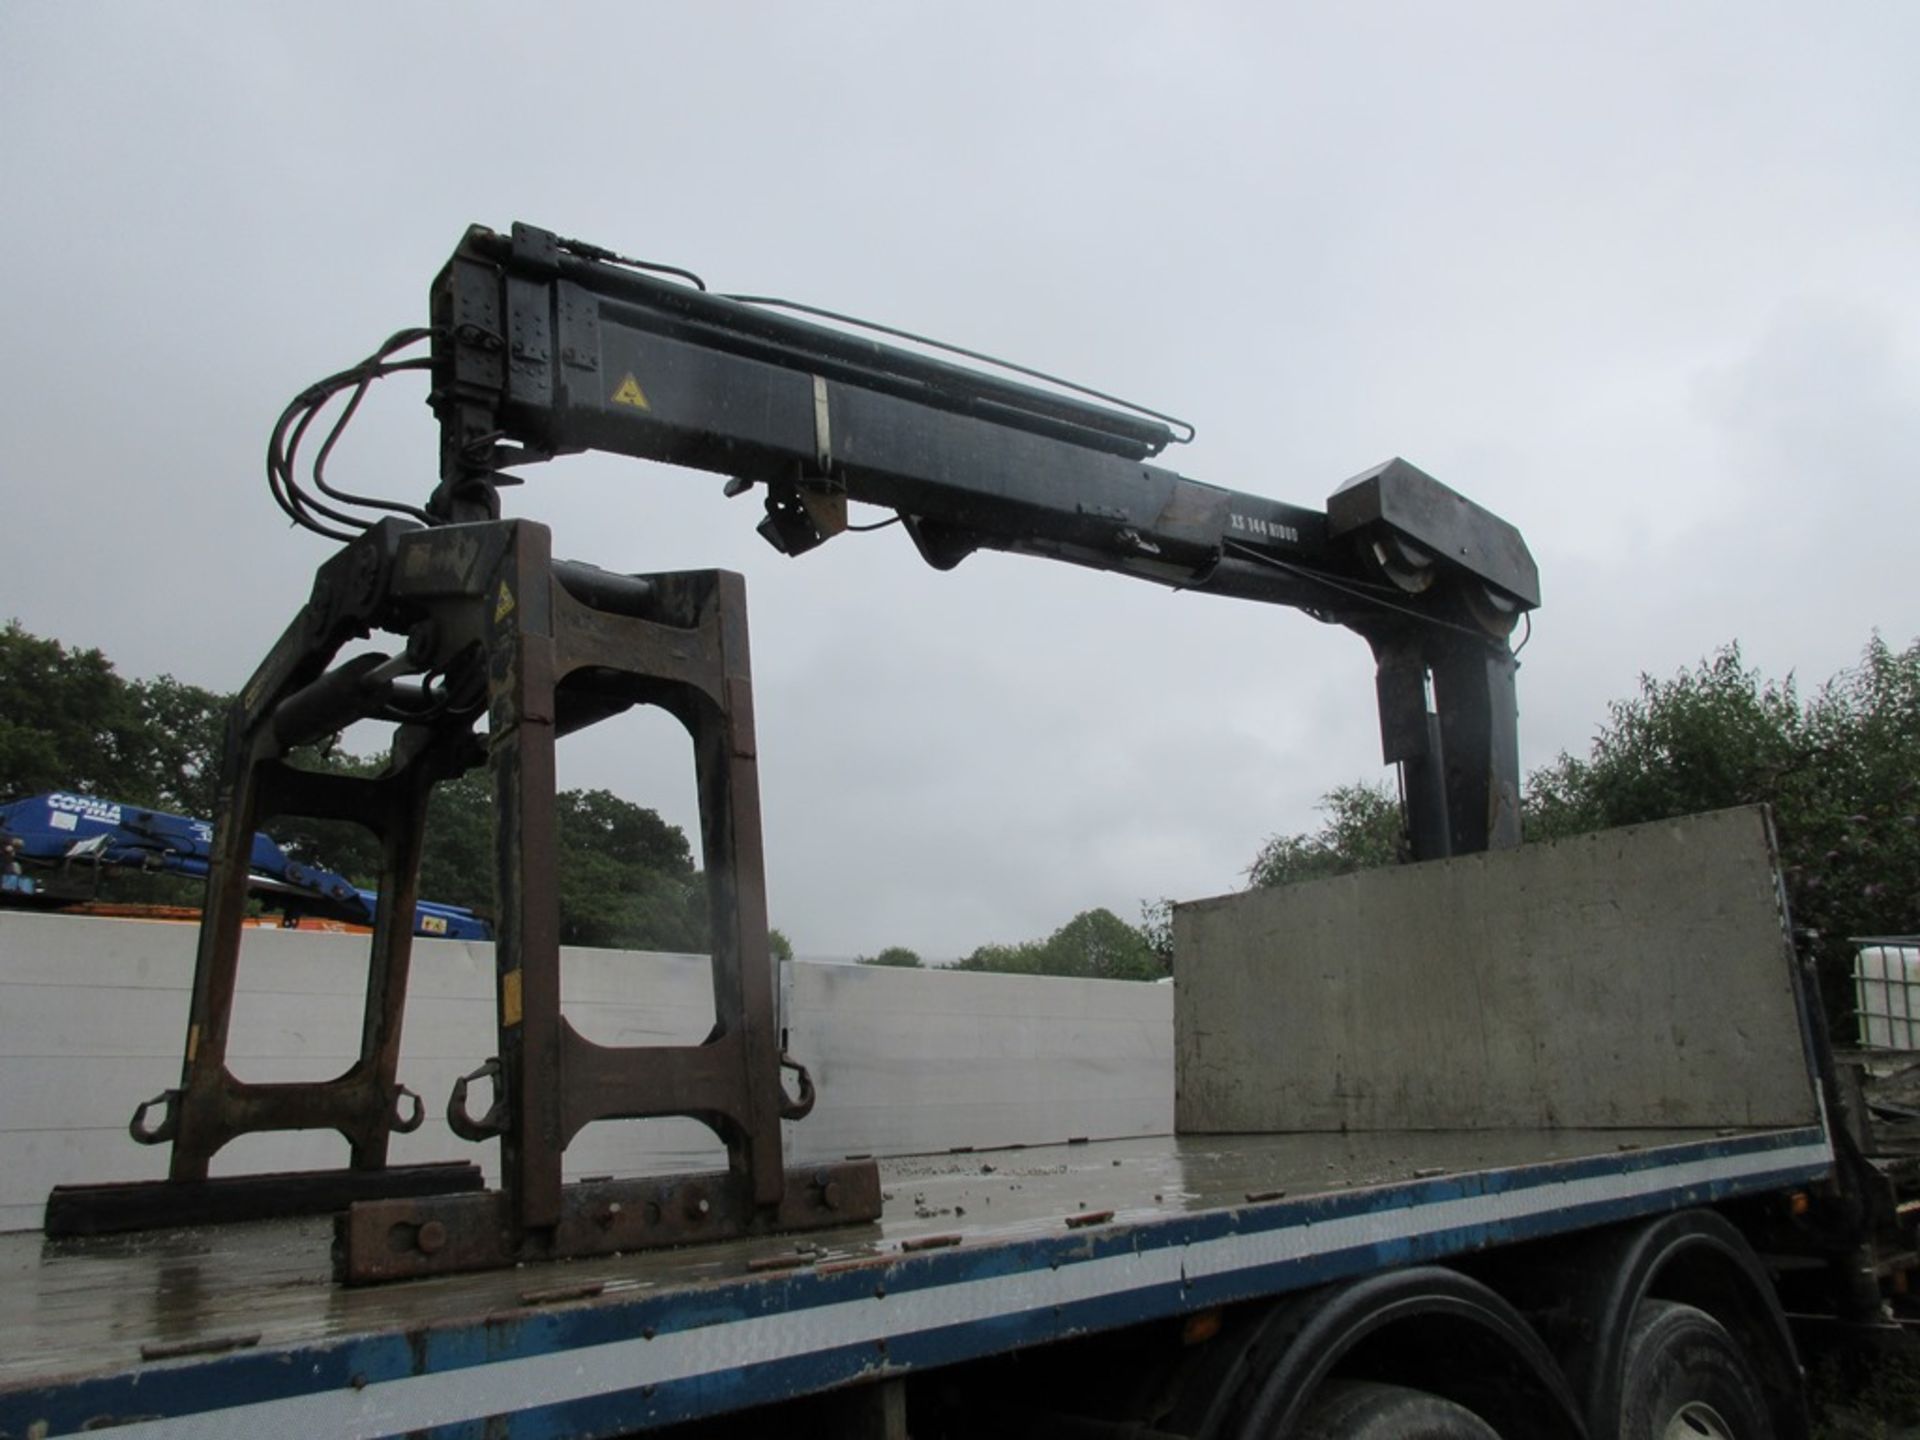 Volvo FM 450 6 x 2 rear lift/rear steer flat bed lorry, 10,837cc, gross weight 26,000kg - Image 10 of 23